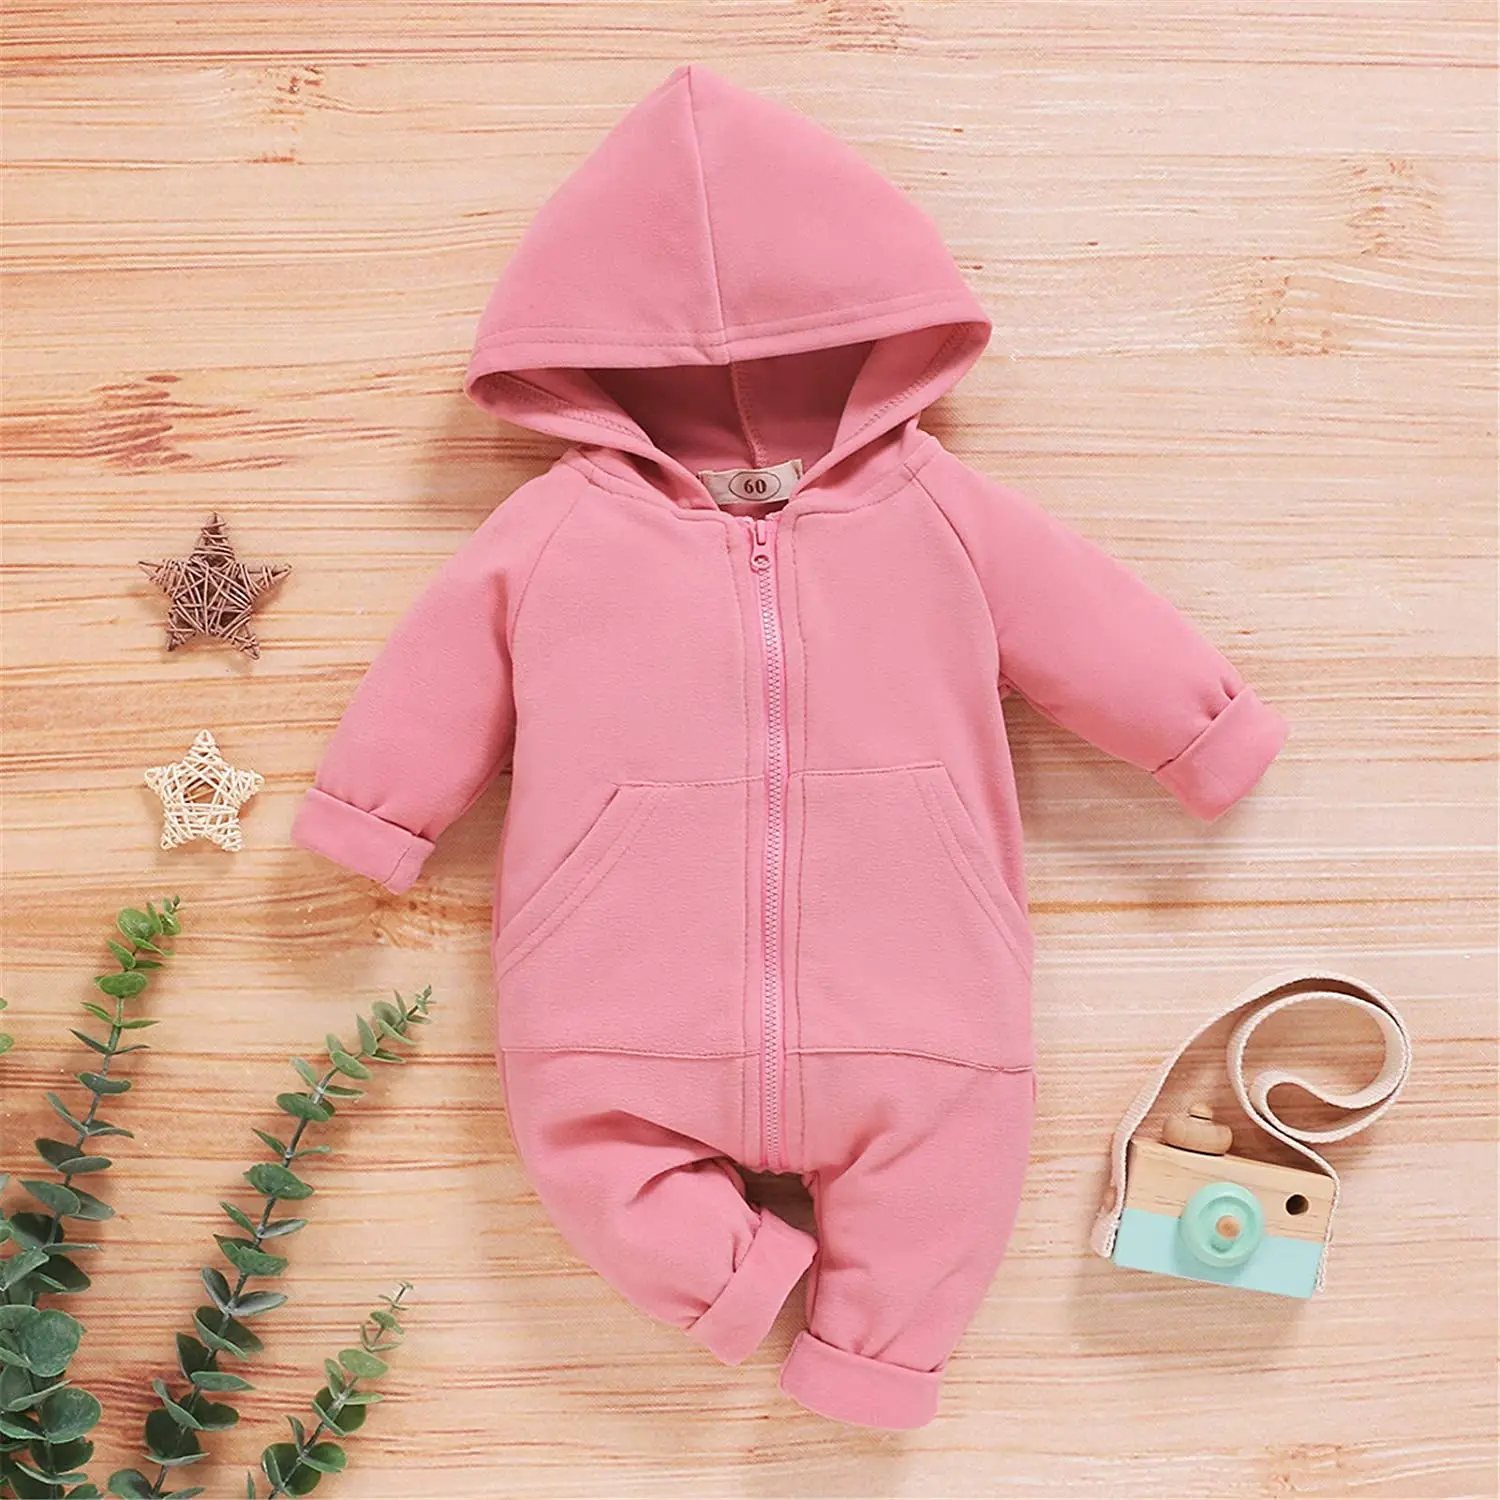 Baby Boy Long Sleeve Hoodie Romper Jumpsuit with Zipper Pocket Outfit